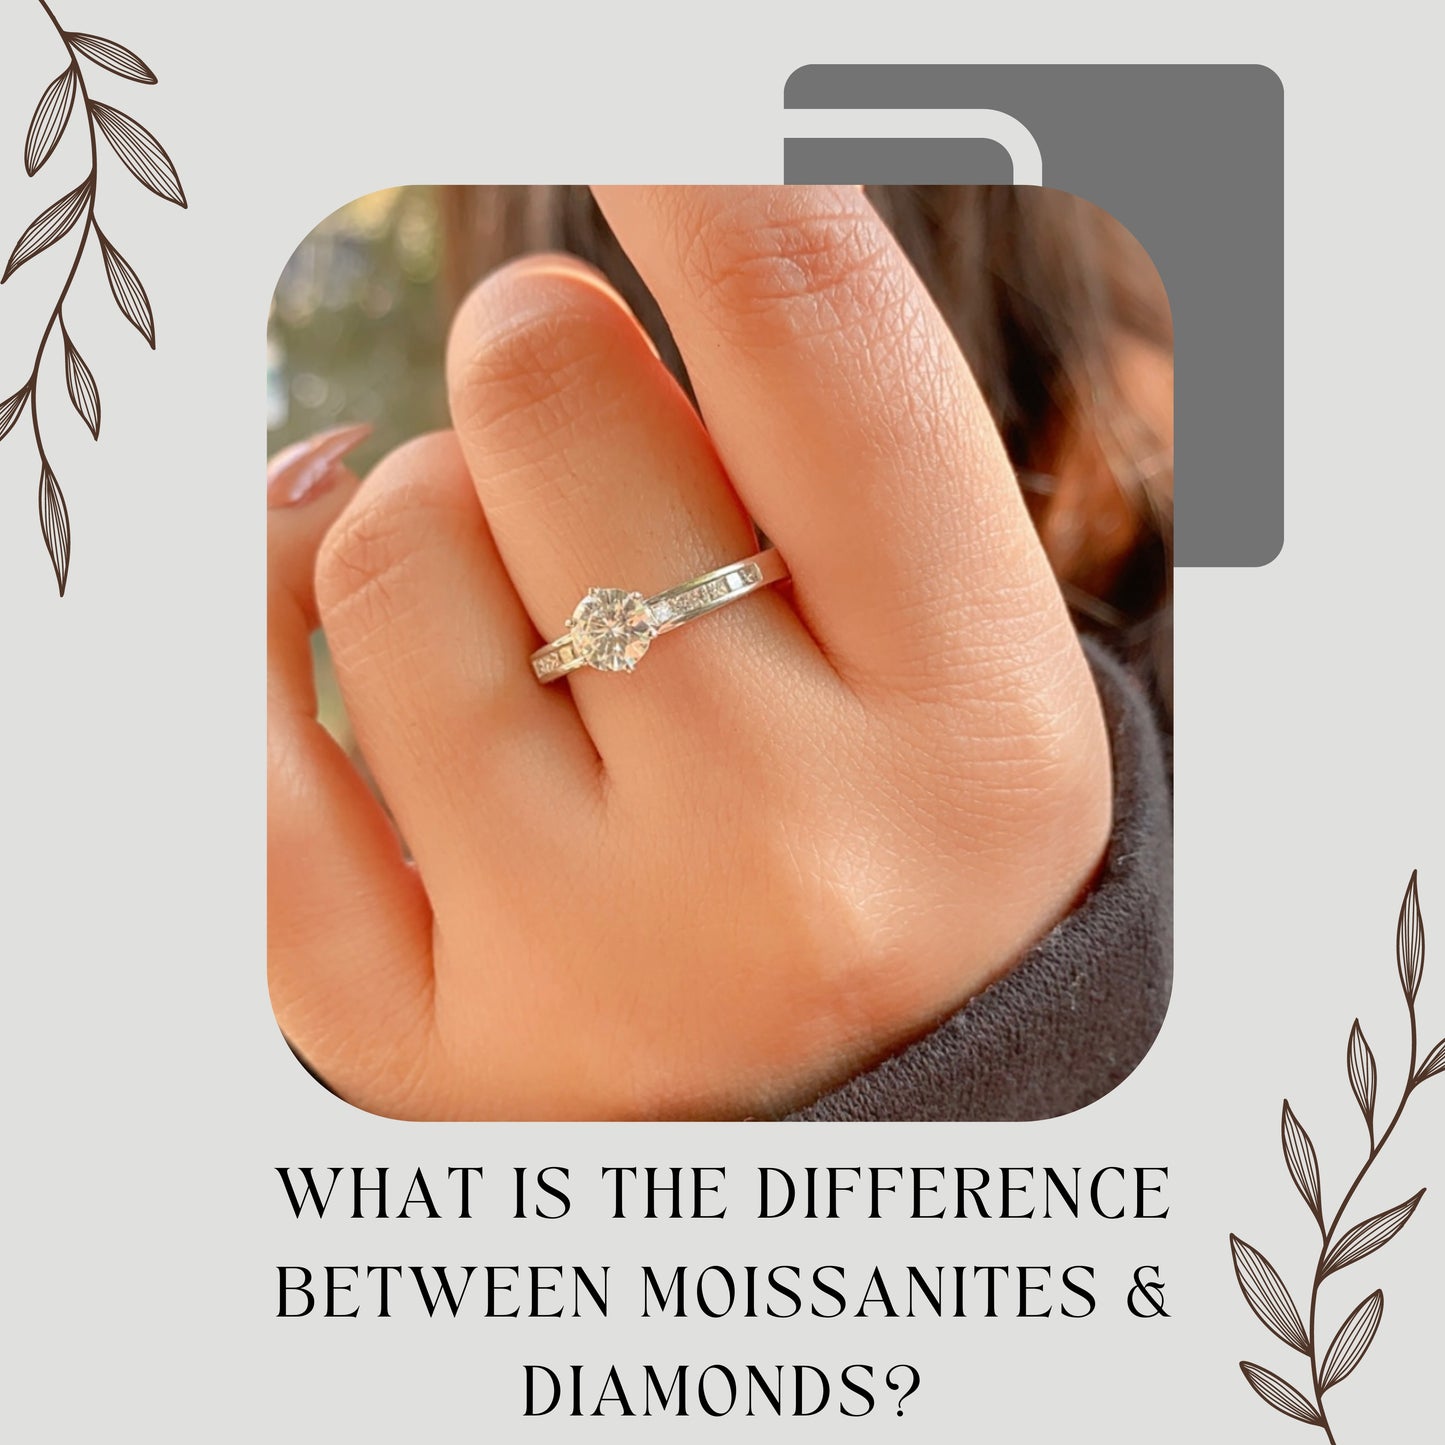 WHAT IS THE DIFFERENCE BETWEEN MOISSANITES & DIAMONDS ?